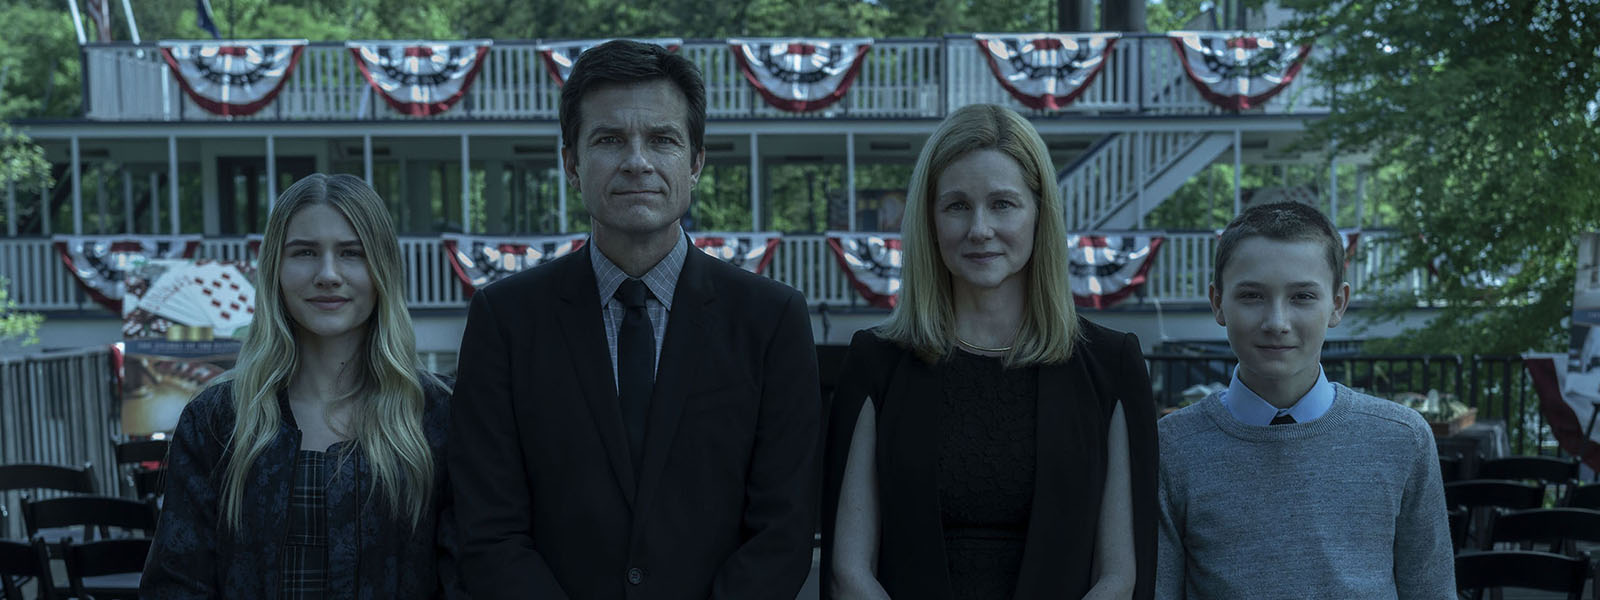 Netflix is finally cancelling 'Ozark' after 4 seasons, but it's still far too many seasons of this show. Netflix should've cut 'Ozark' after season 1.